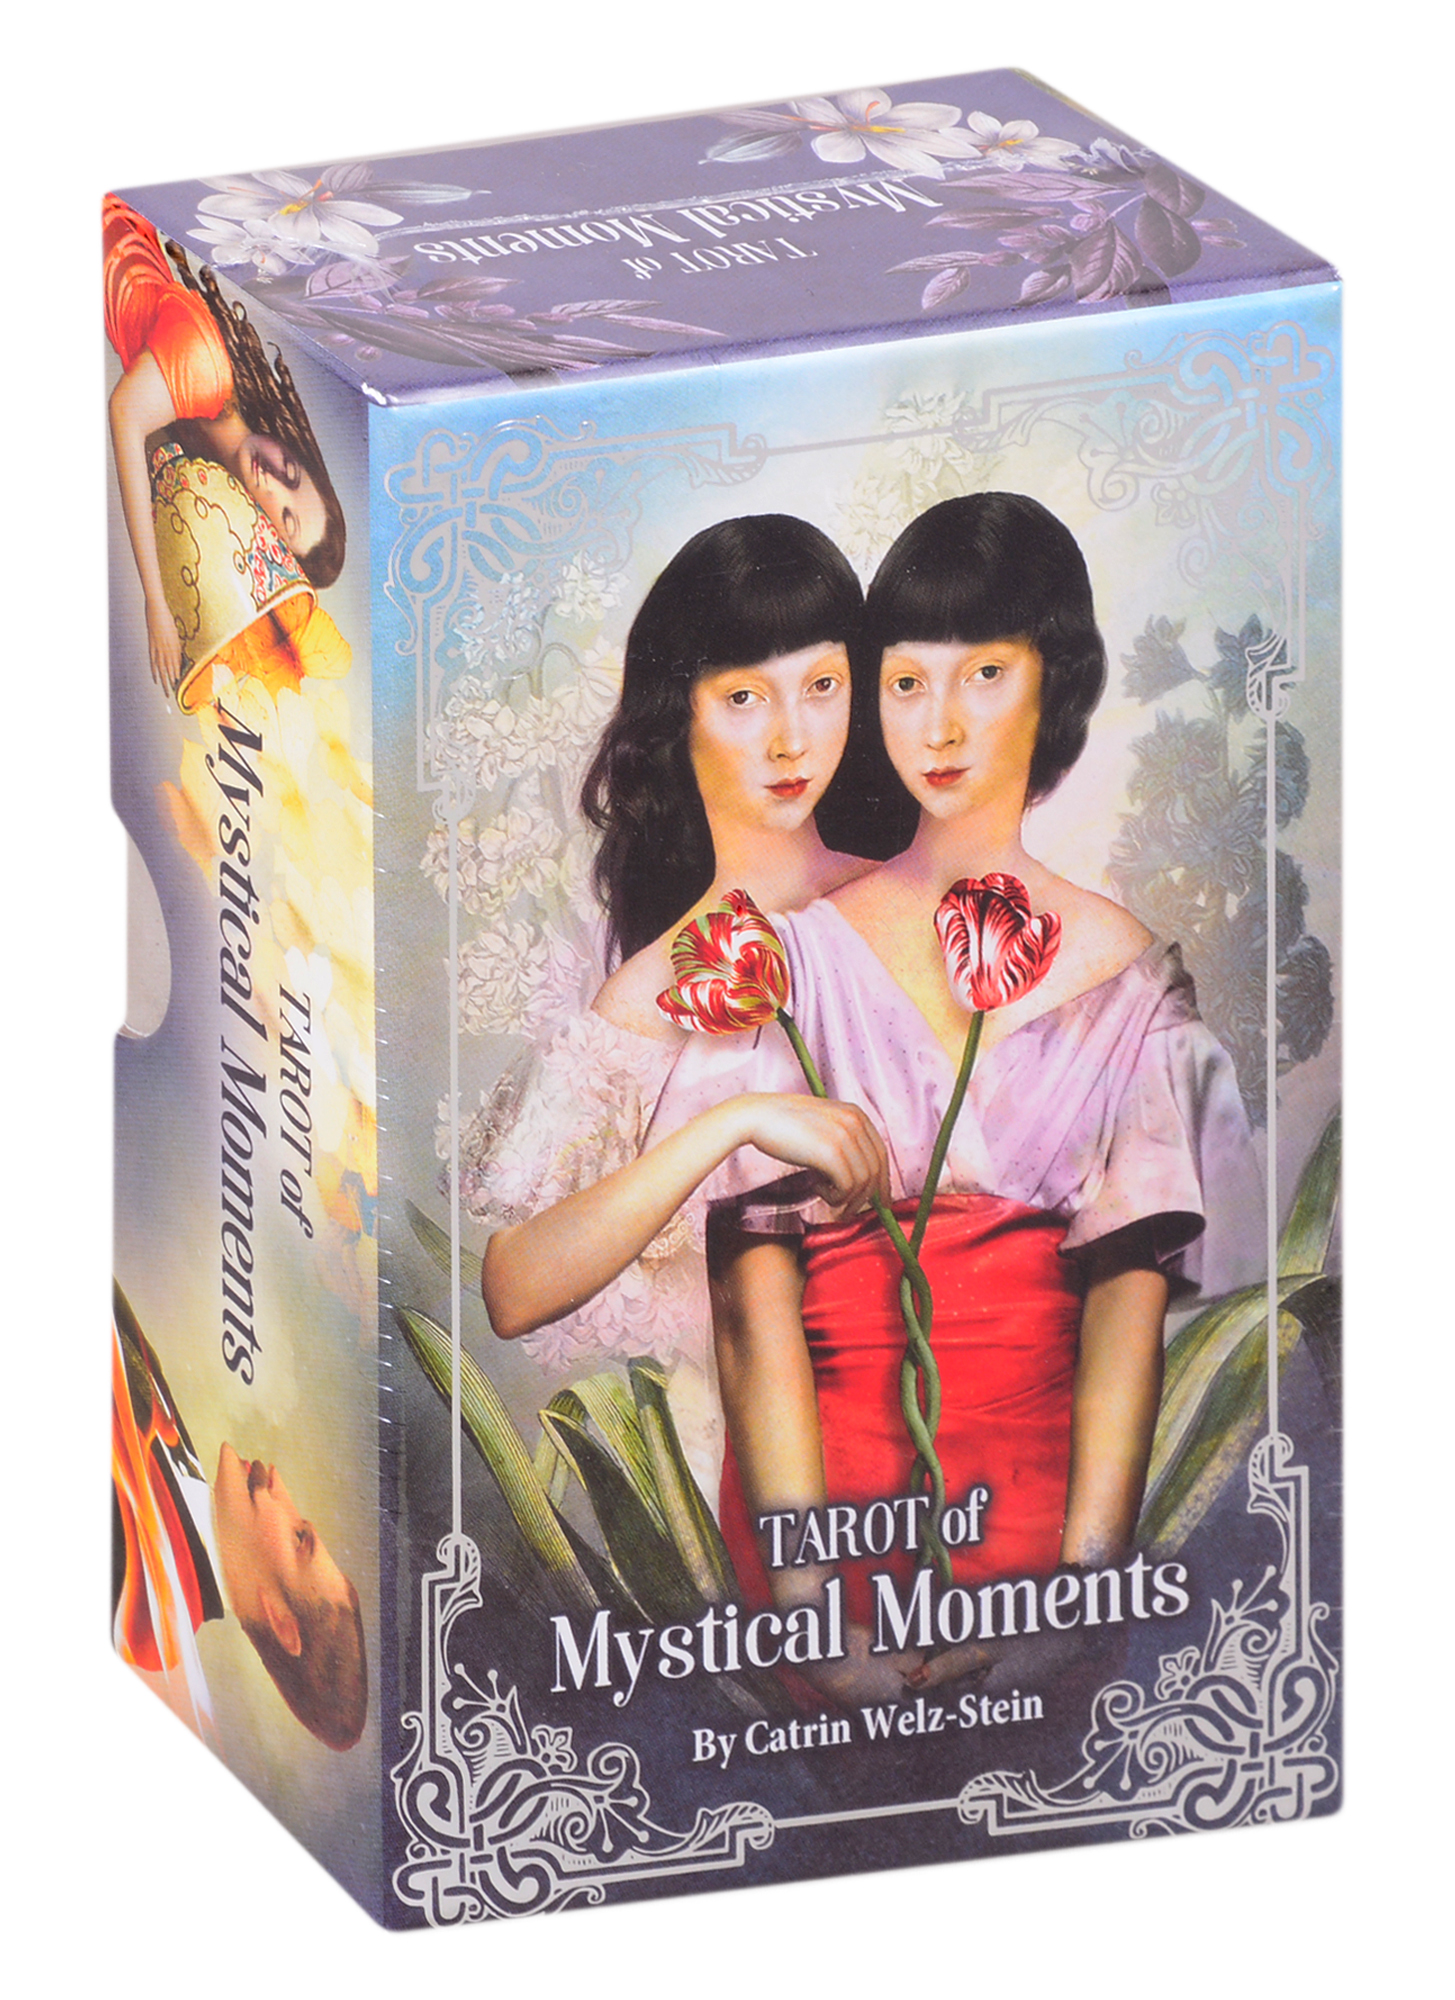 Tarot of Mystical Moments (96 карт) in 2021 the most popular tarot deck 78 cards divination fate game deck english version new preferential oracle cartas tarot